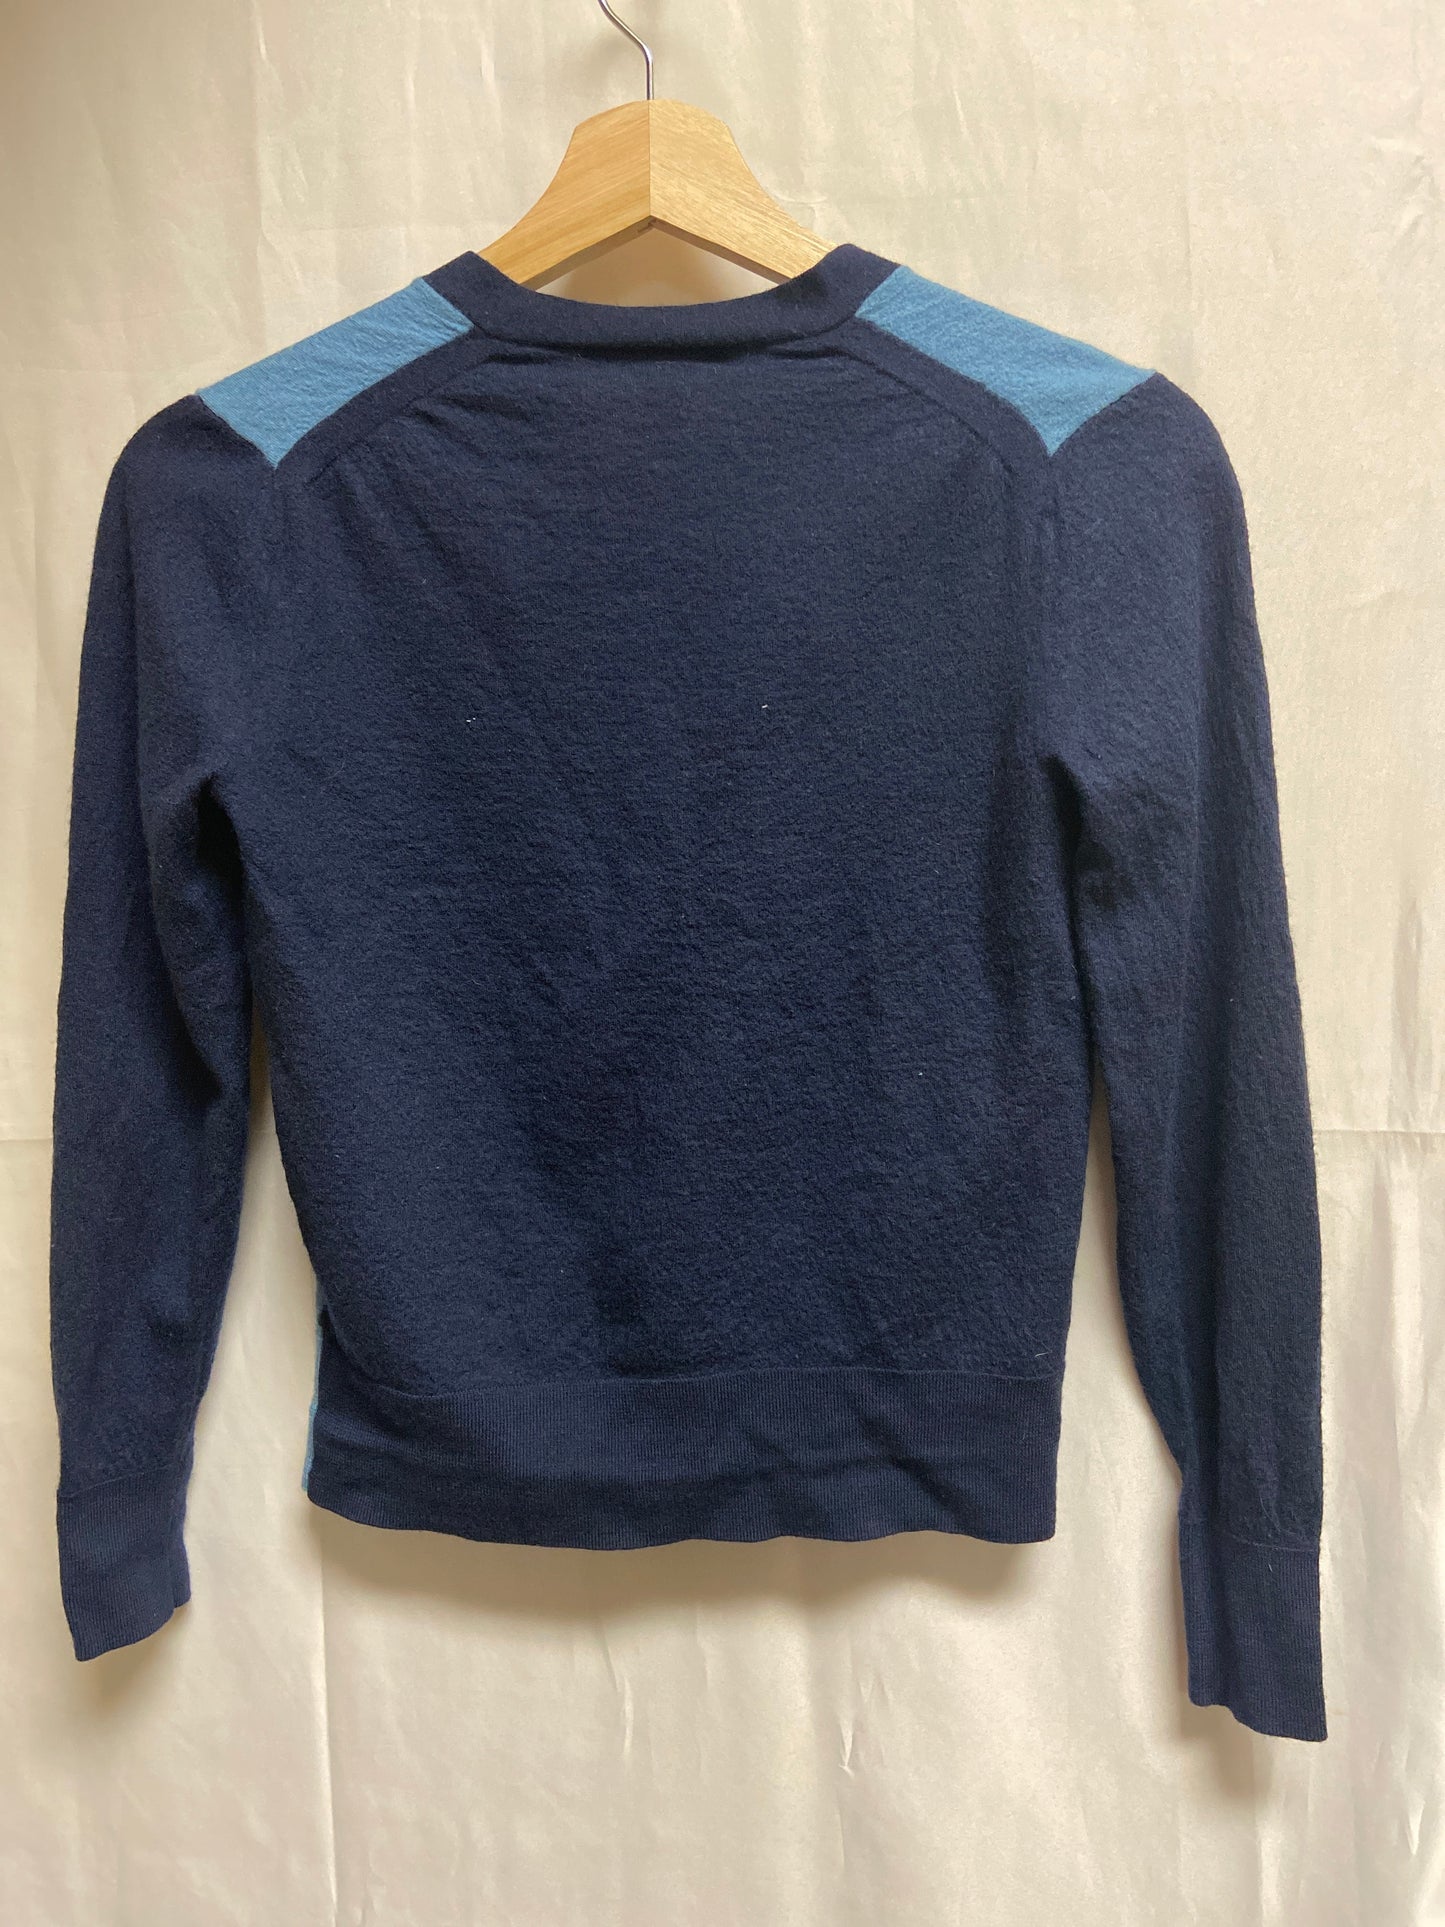 Sweater Designer By Burberry  Size: Petite   Small